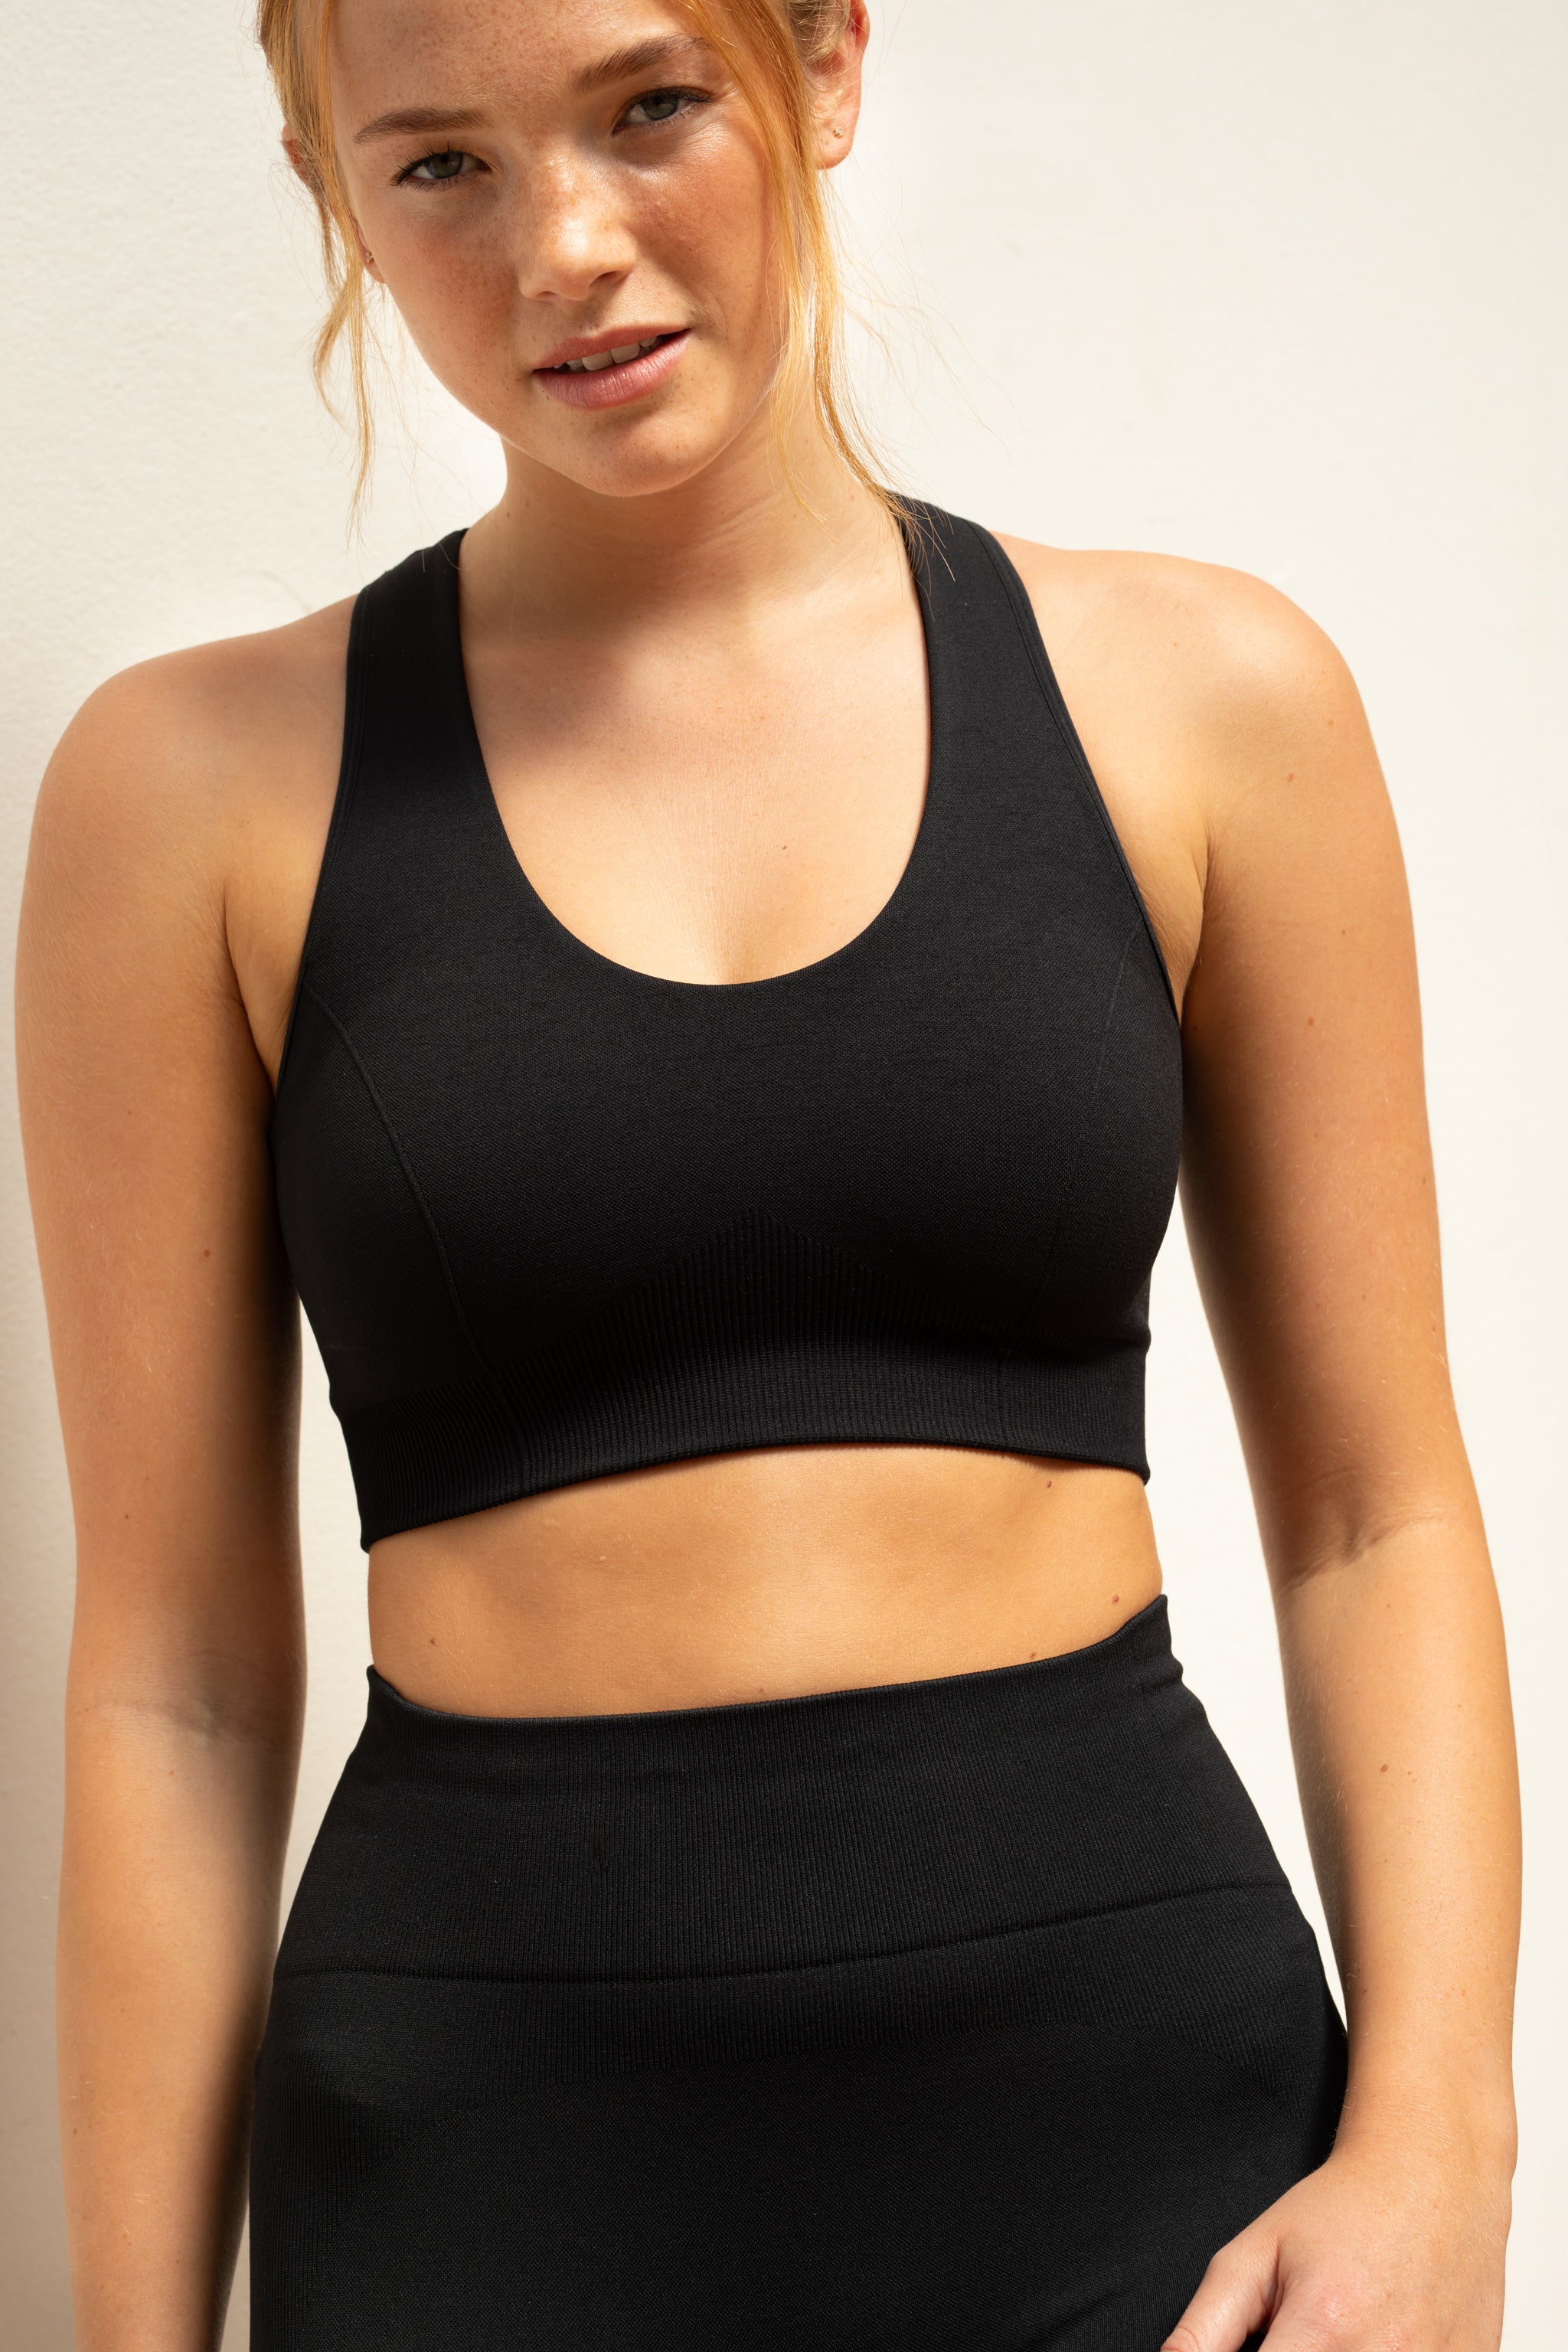 Black recycled supportive sports bra and black leggings from sustainable women's activewear brand, Jilla.